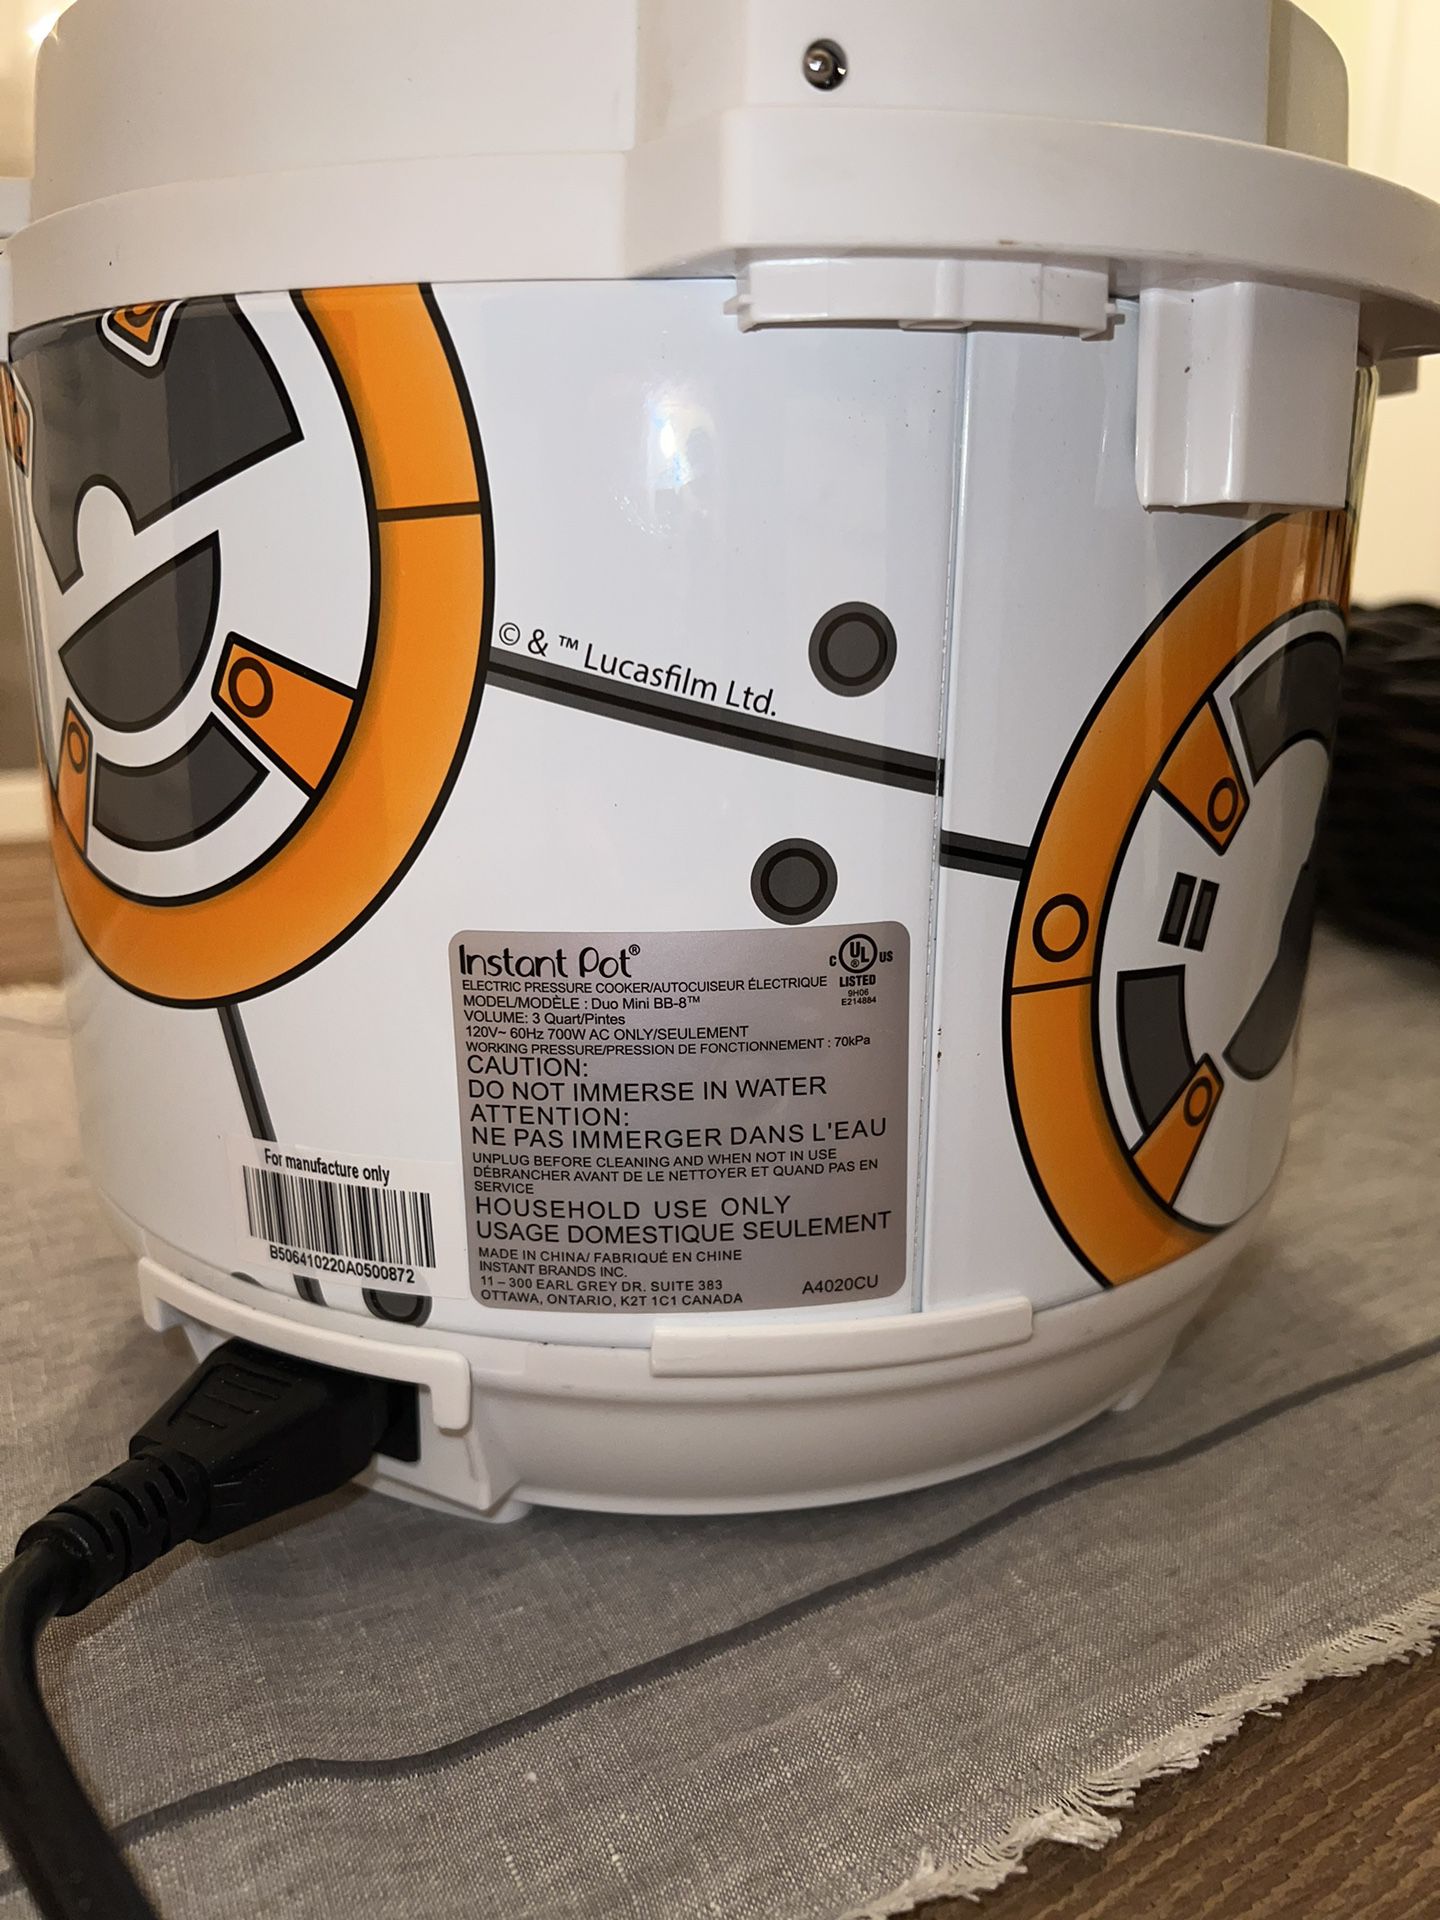 Duo Mini BB-8 Star Wars Instant Pot for Sale in Gig Harbor, WA - OfferUp